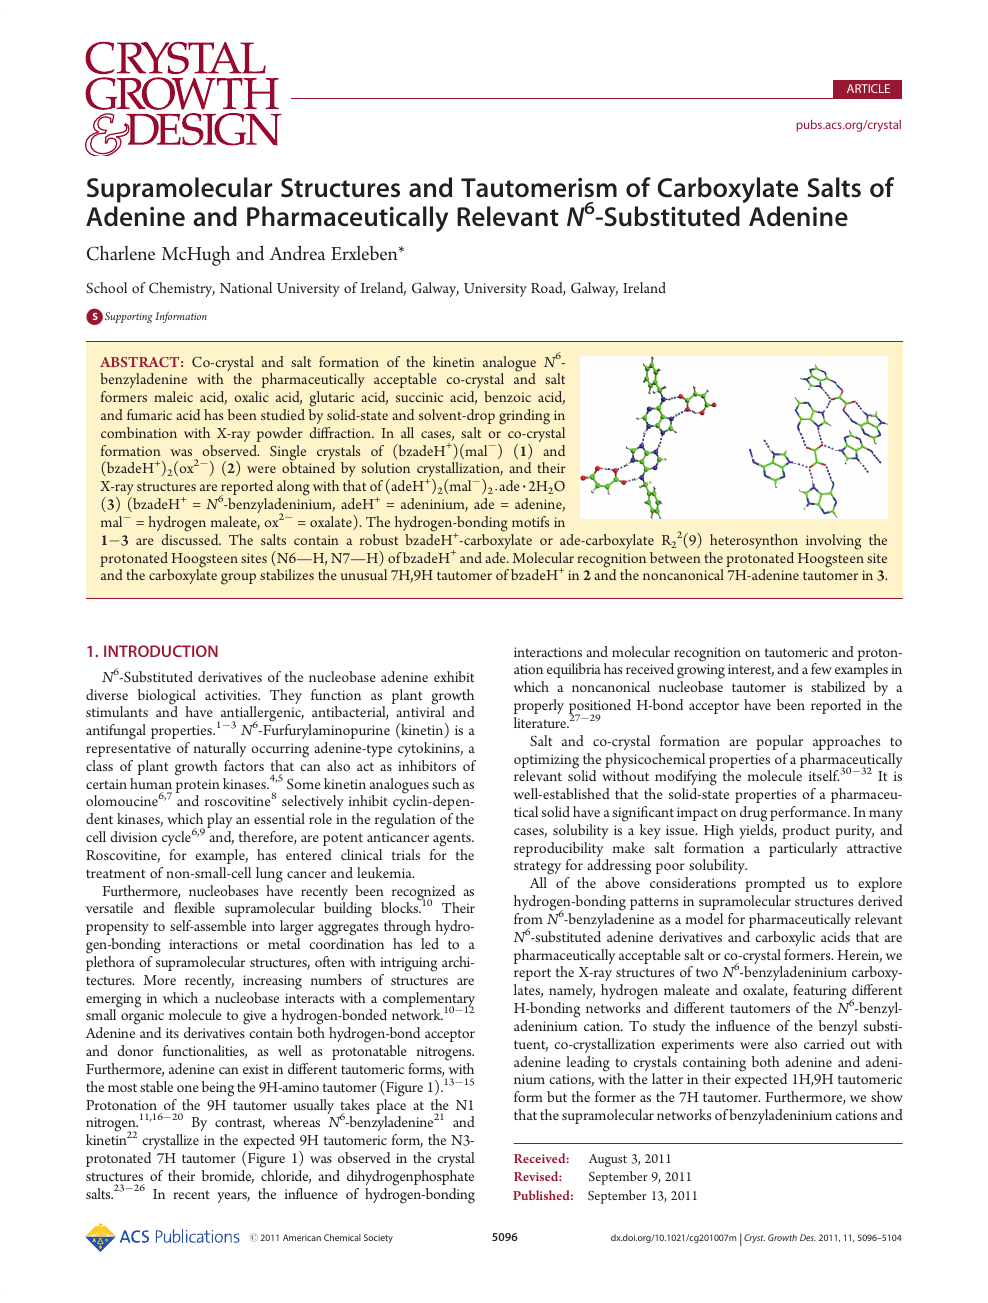 Supramolecular Structures And Tautomerism Of Carboxylate Salts Of Adenine And Pharmaceutically Relevant N 6 Substituted Adenine Topic Of Research Paper In Chemical Sciences Download Scholarly Article Pdf And Read For Free